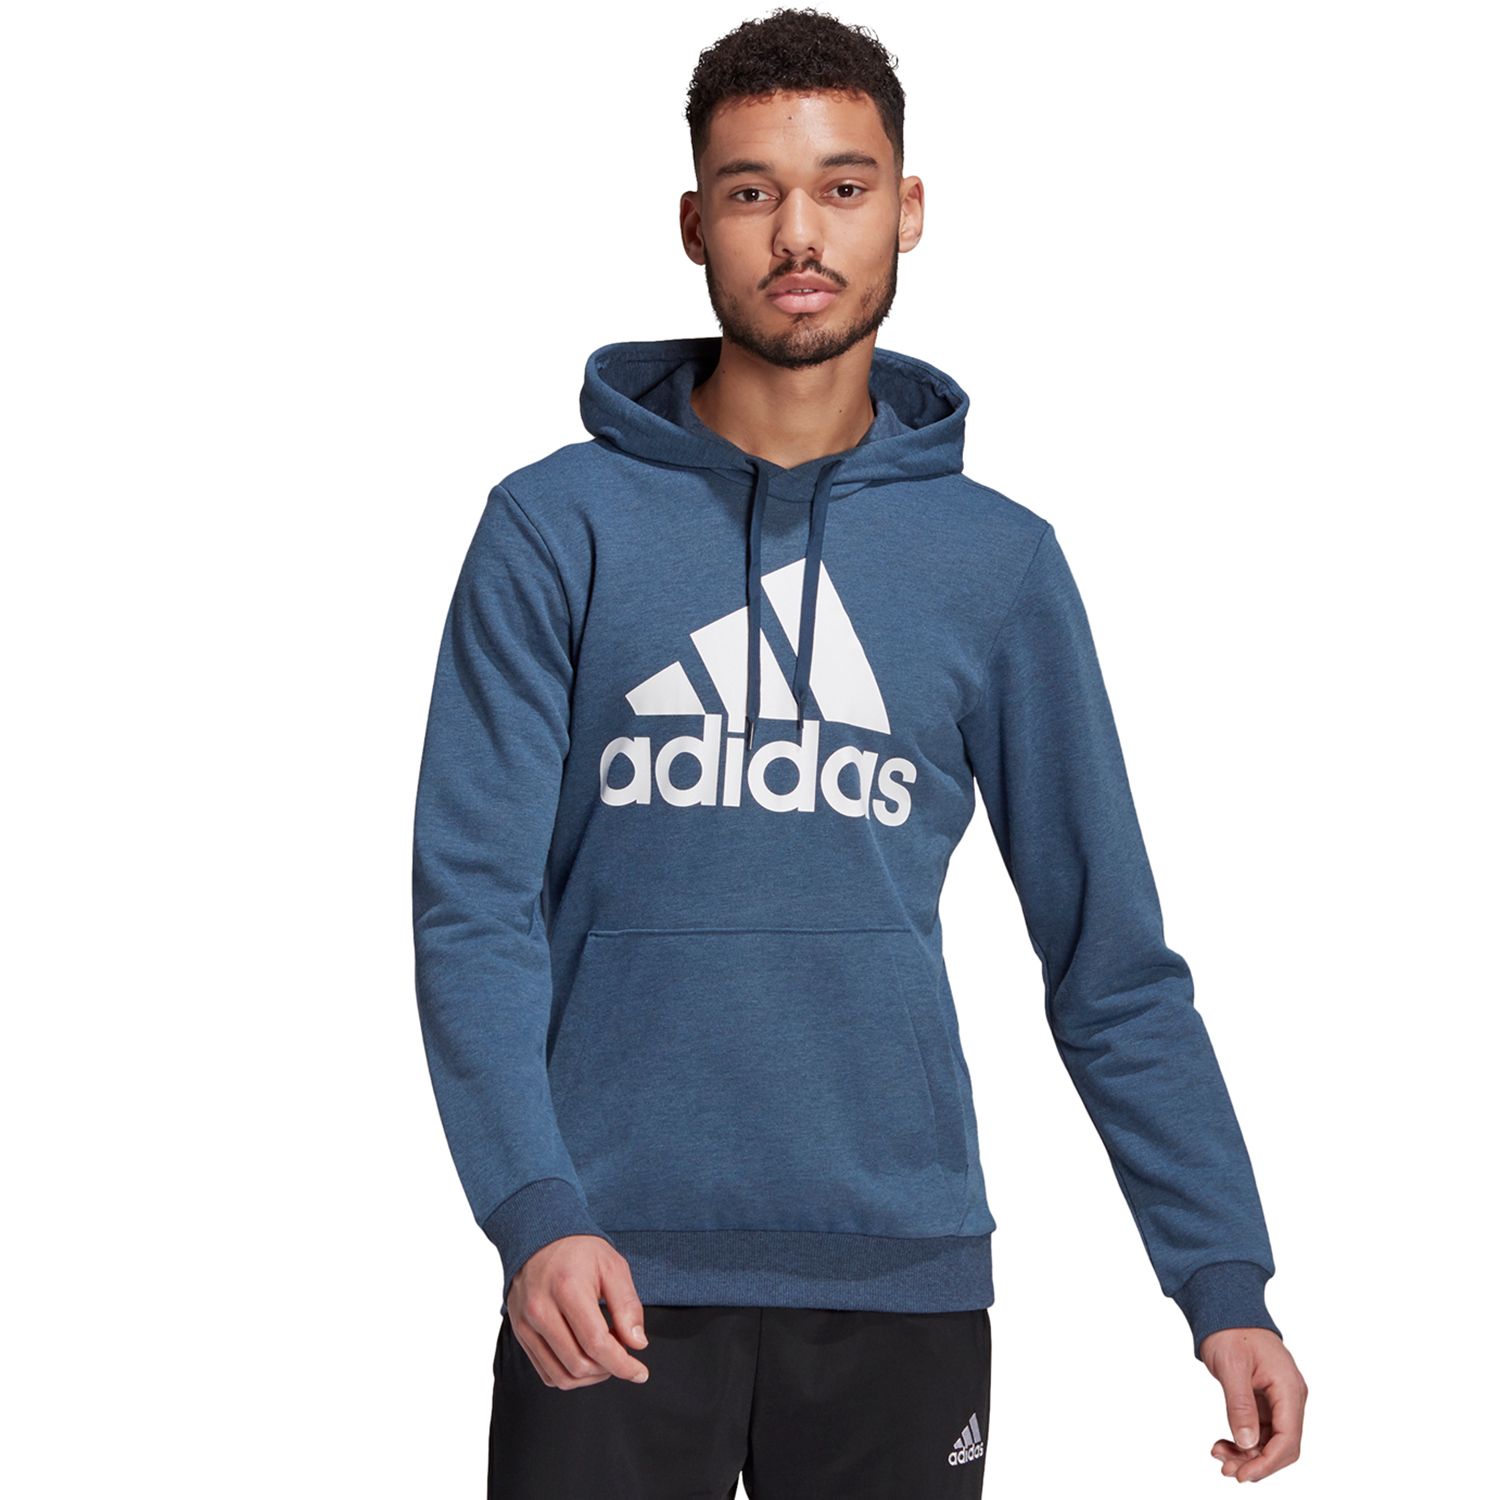 adidas sweater blue and white